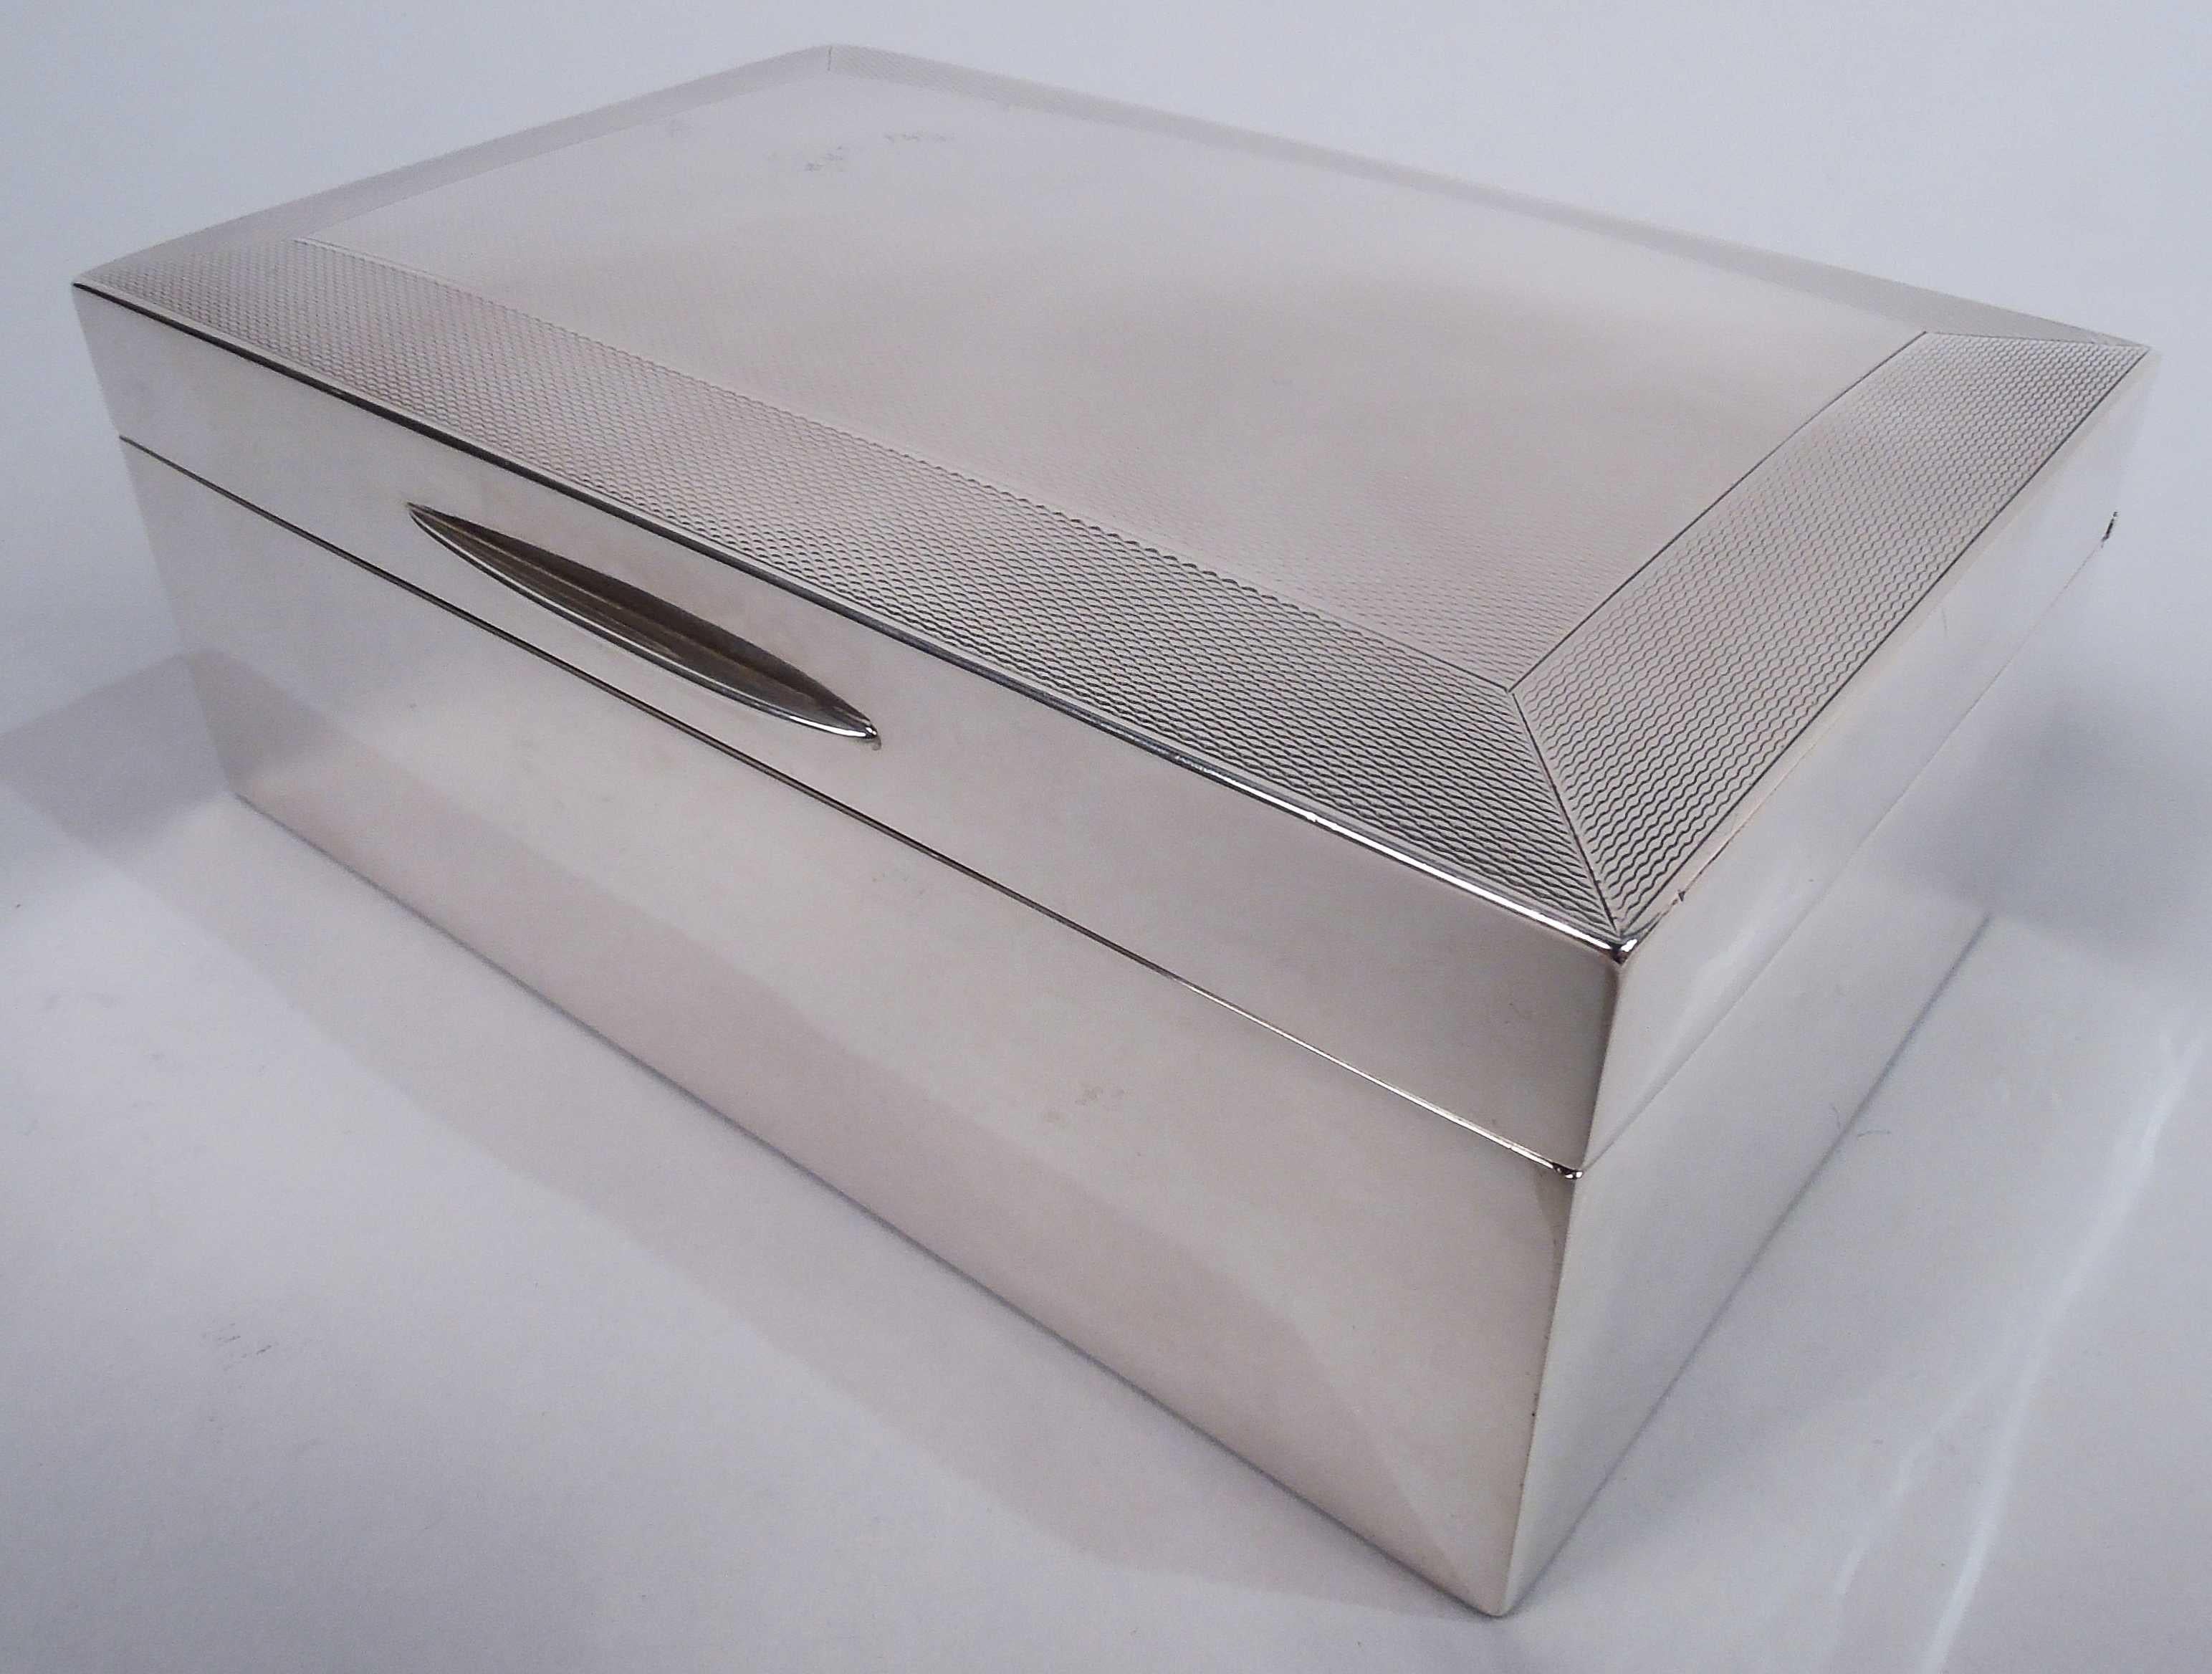 Victorian Modern sterling silver box. Made by Joseph Braham in London in 1895. Rectangular with straight and plain sides. Cover hinged and tabbed; top gently curved engine turning bordered by same. Box interior cedar lined. Cover interior